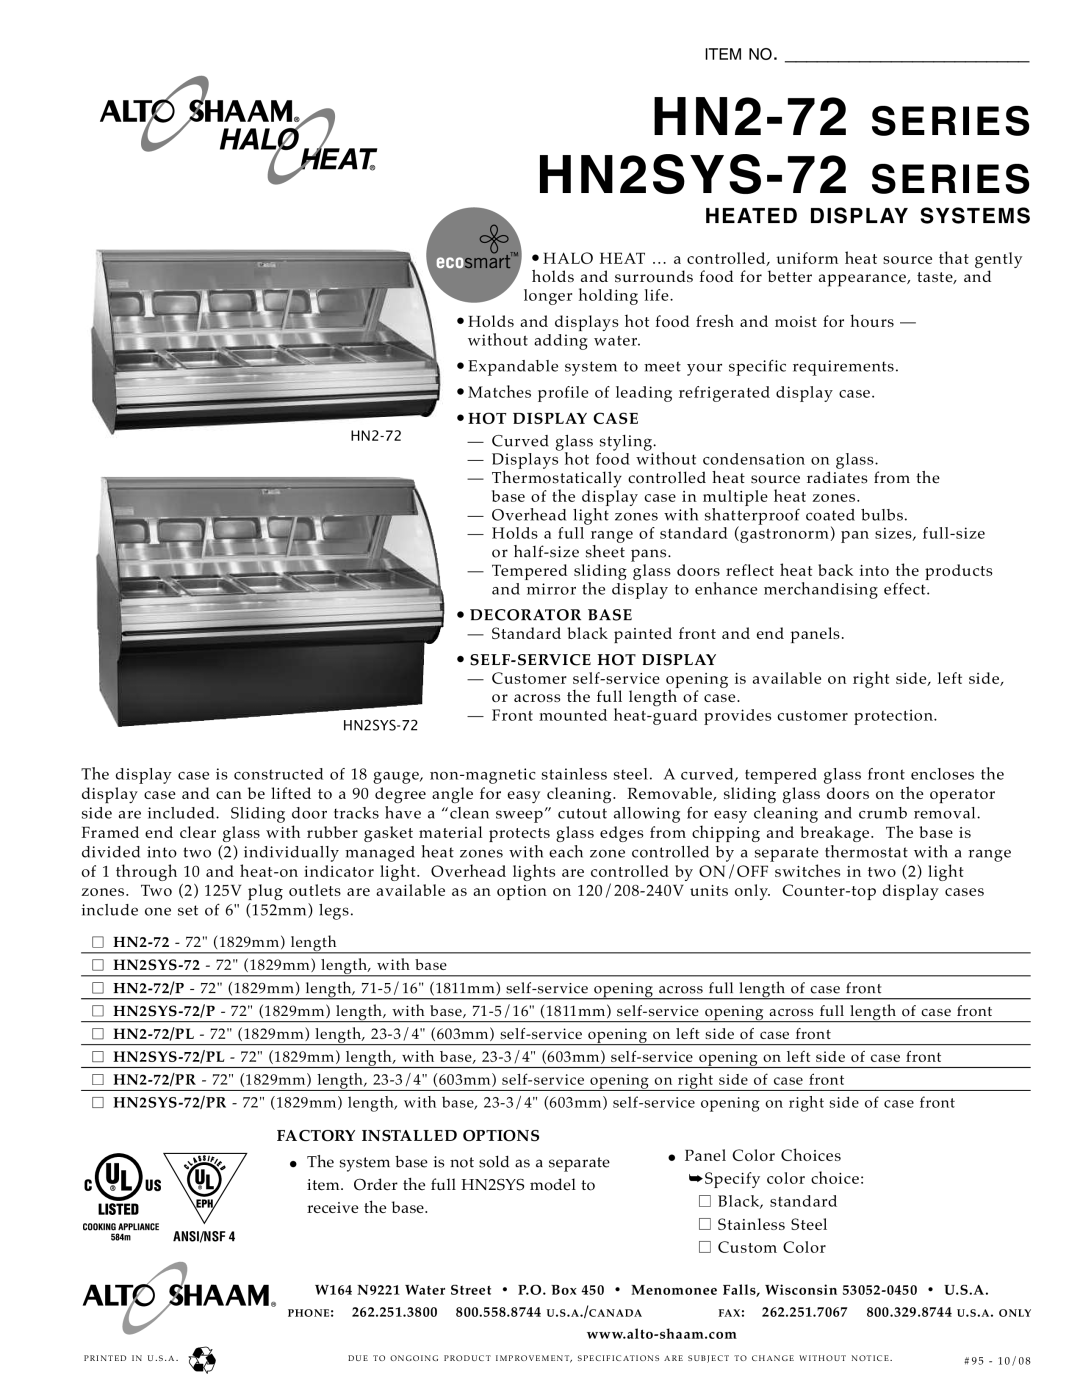 Alto-Shaam HN2SYS-72 specifications HN2-72 SERIES HN2SY S-72 SERIES, Item No, Heated Display Systems 